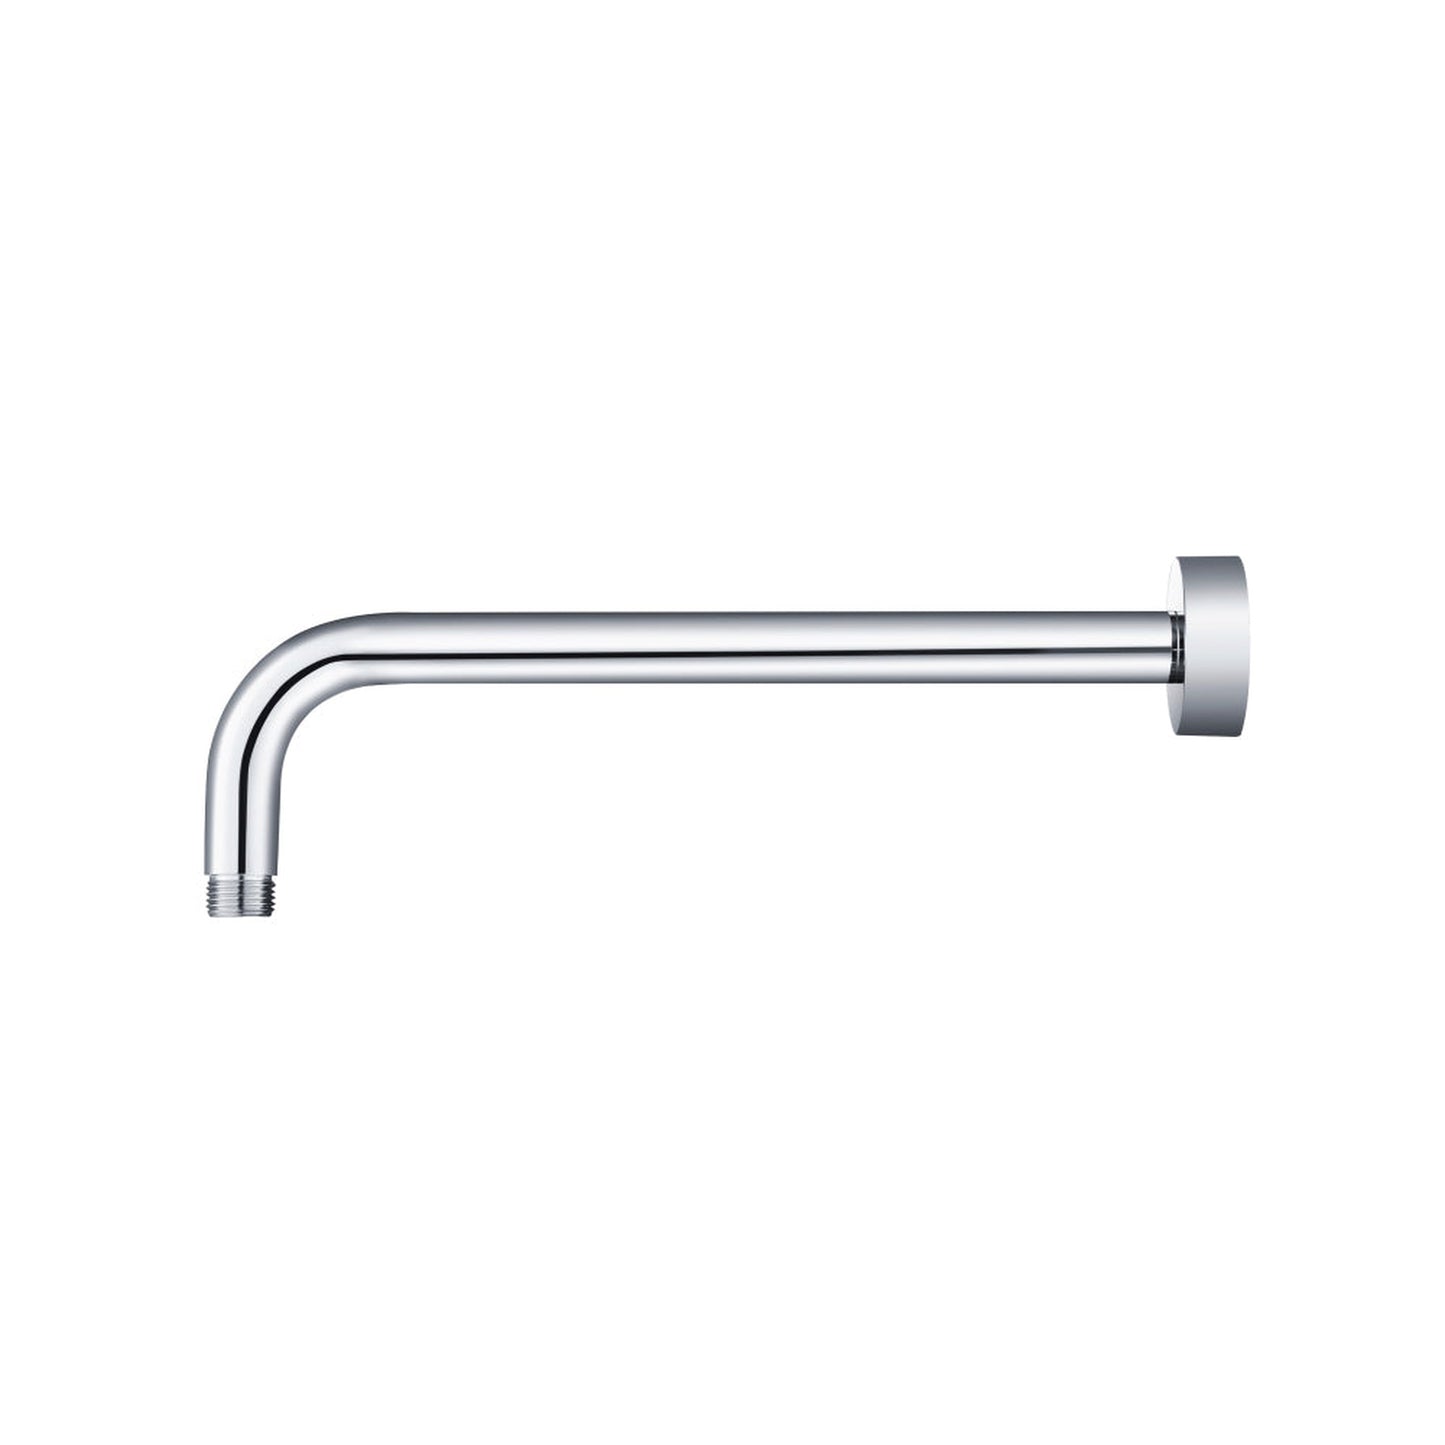 Isenberg Universal Fixtures 12" Chrome Solid Brass Wall-Mounted Shower Arm With J-Shape Extension and Round Sliding Flange